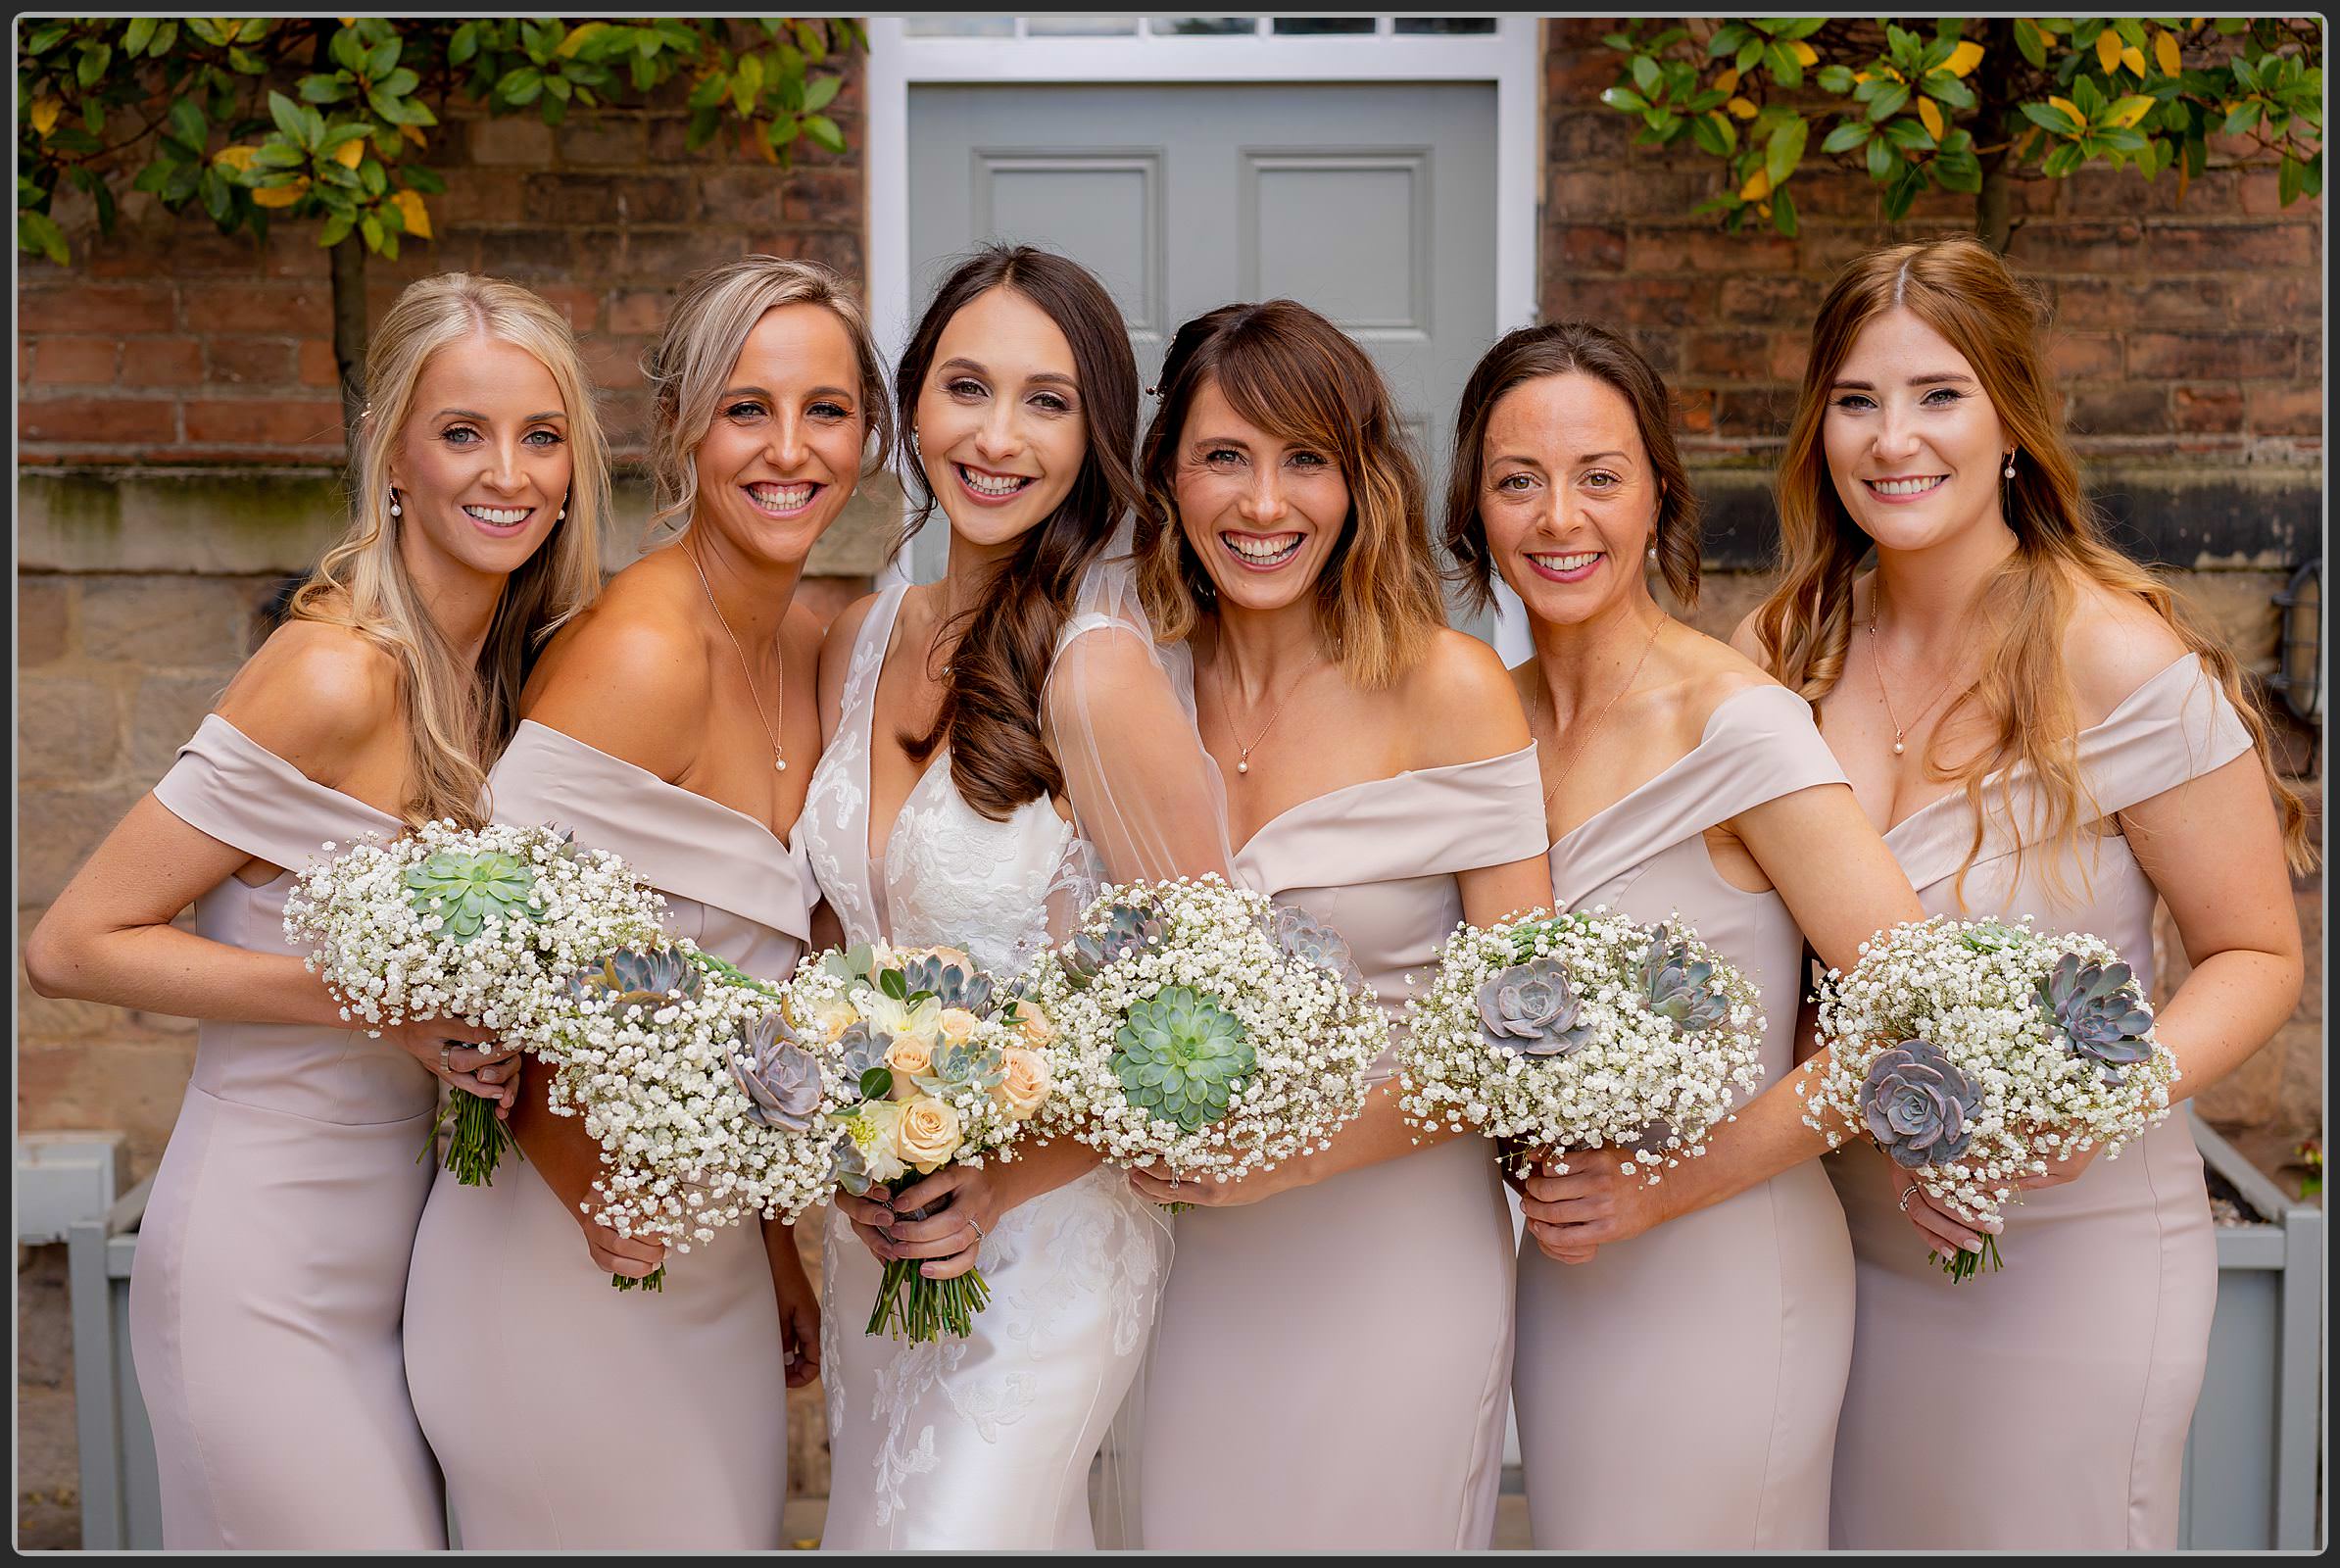 Ellie and her bridesmaids